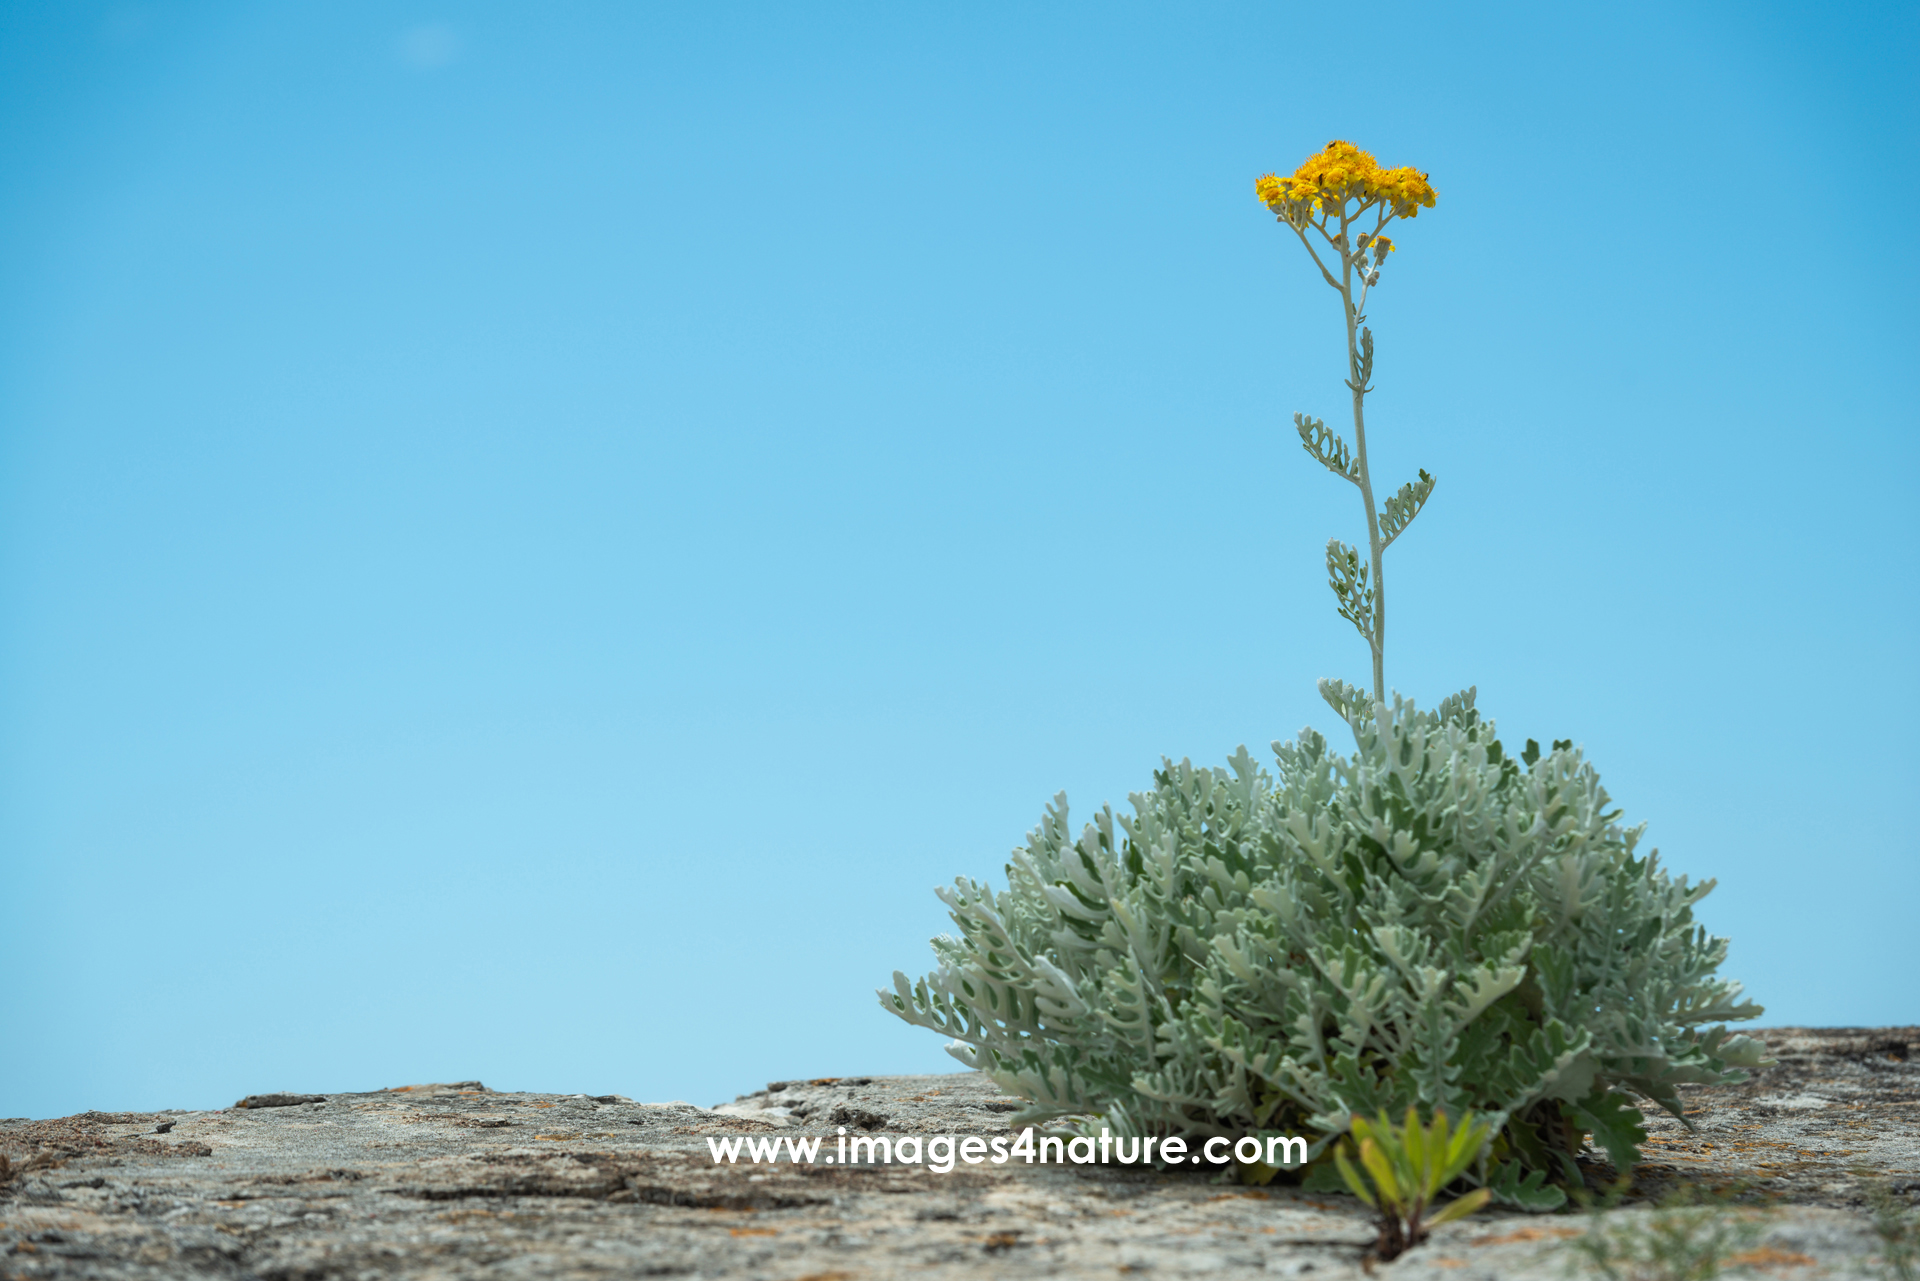 Silver ragwort plant with yellow flowers against blue sky